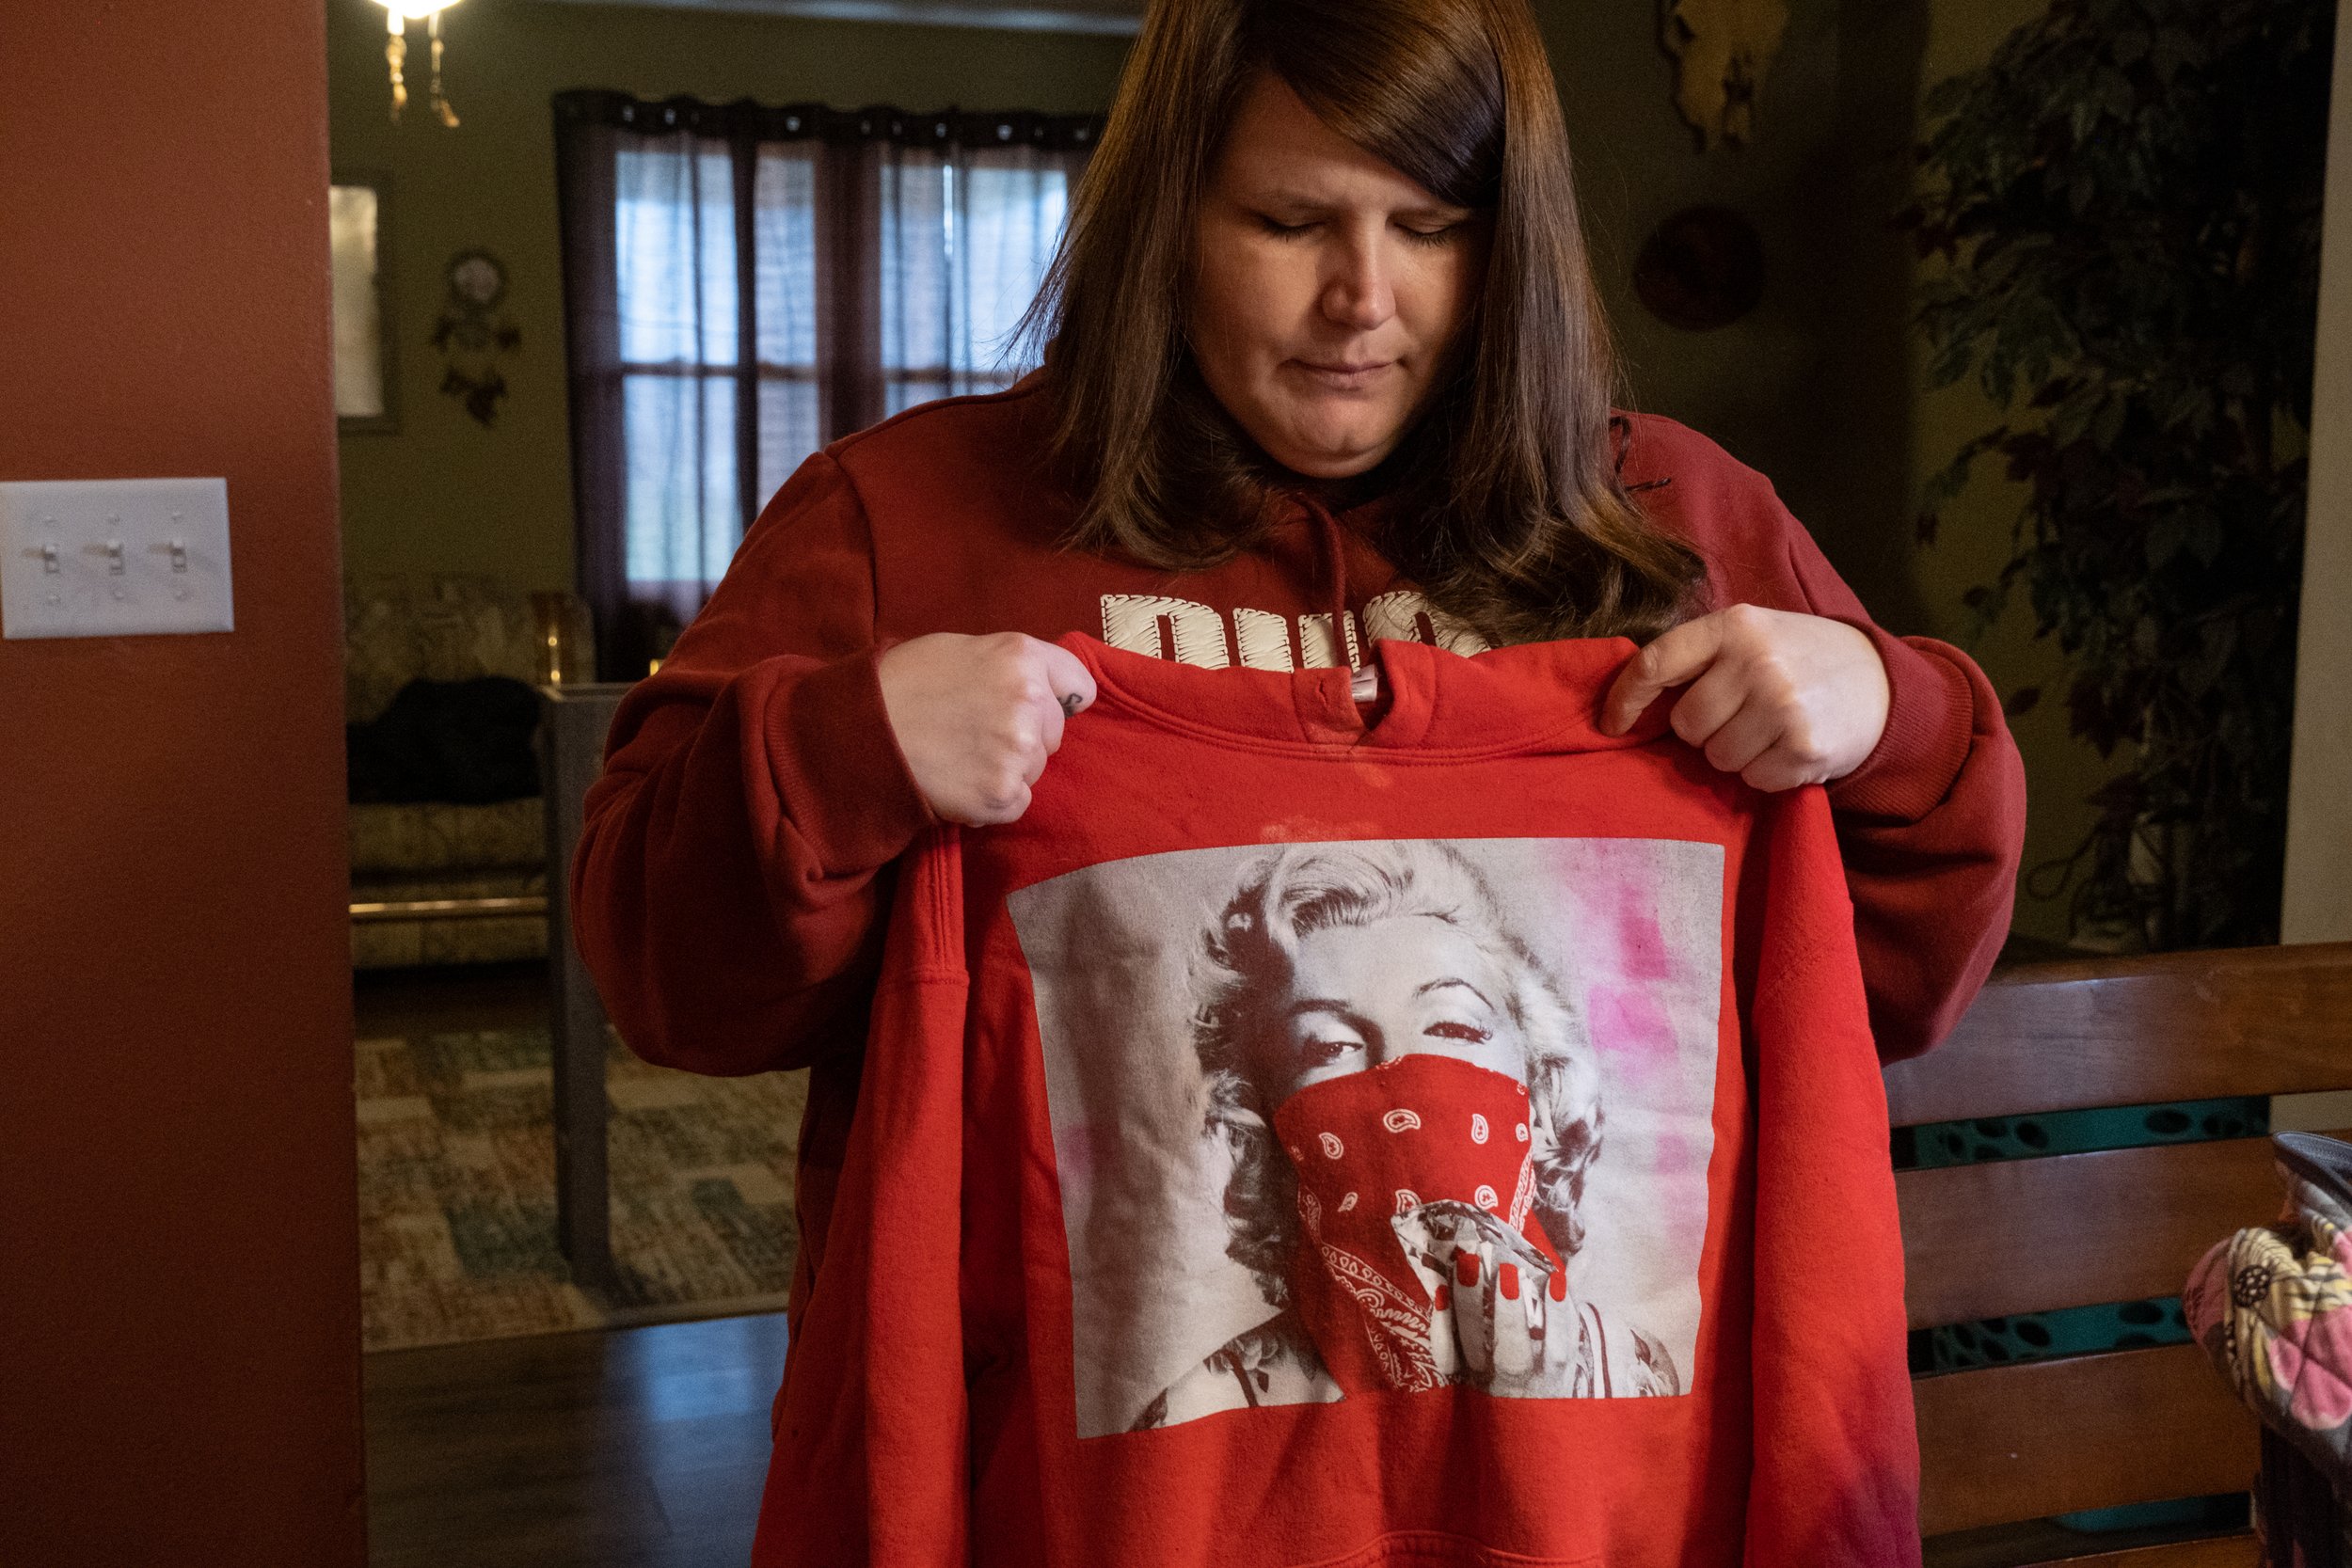  On April 2, 2022, Justice holds the sweatshirt Rodgers was wearing the night of her death. She keeps it in the overnight bag her daughter packed for the night she fatally overdosed in November 2020. The police returned the items to Justice. (Photo ©